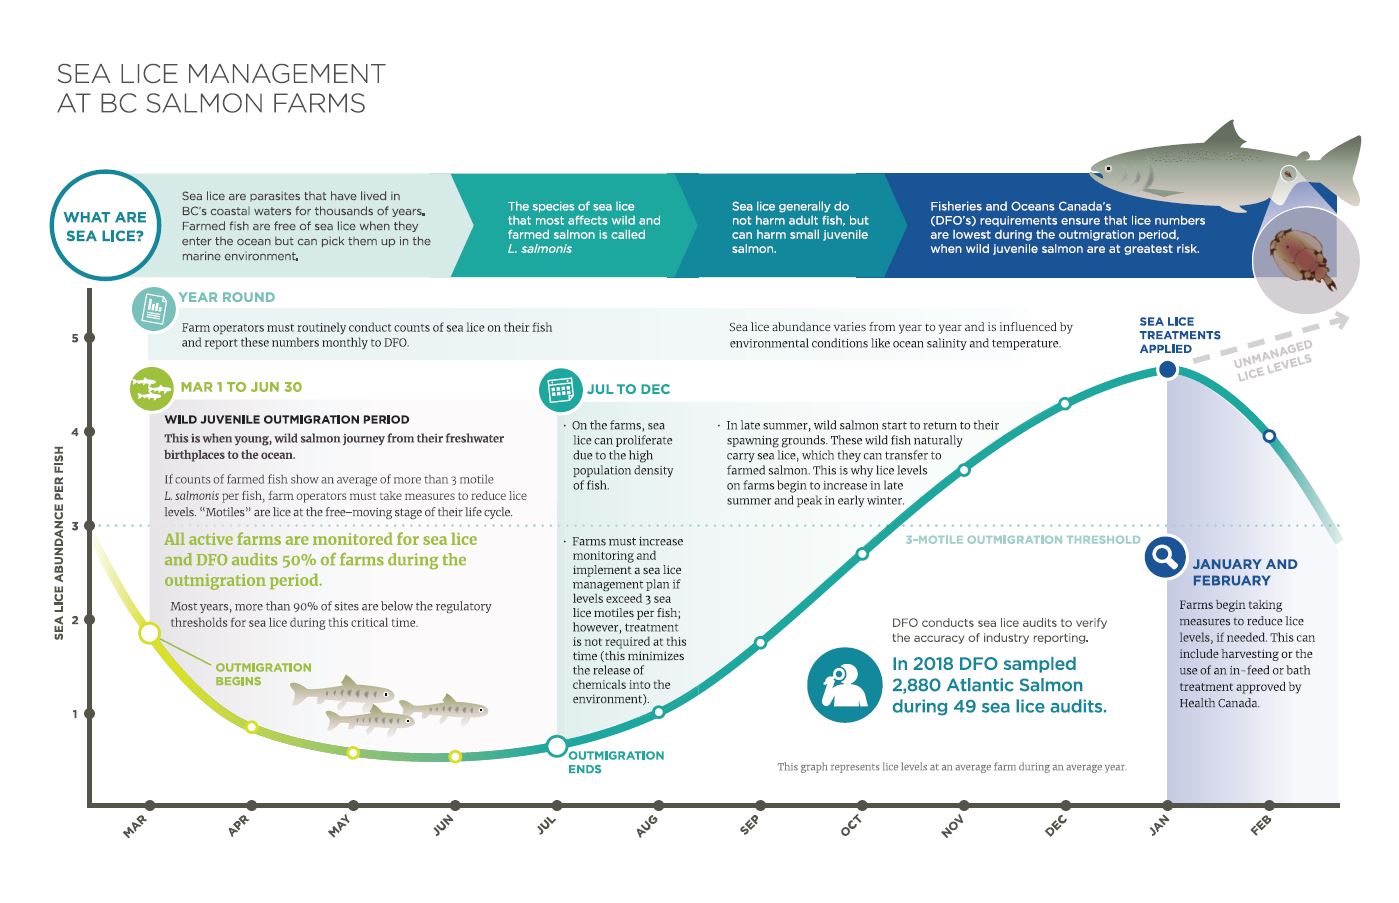 Image: Sea lice management at BC salmon farms infographic